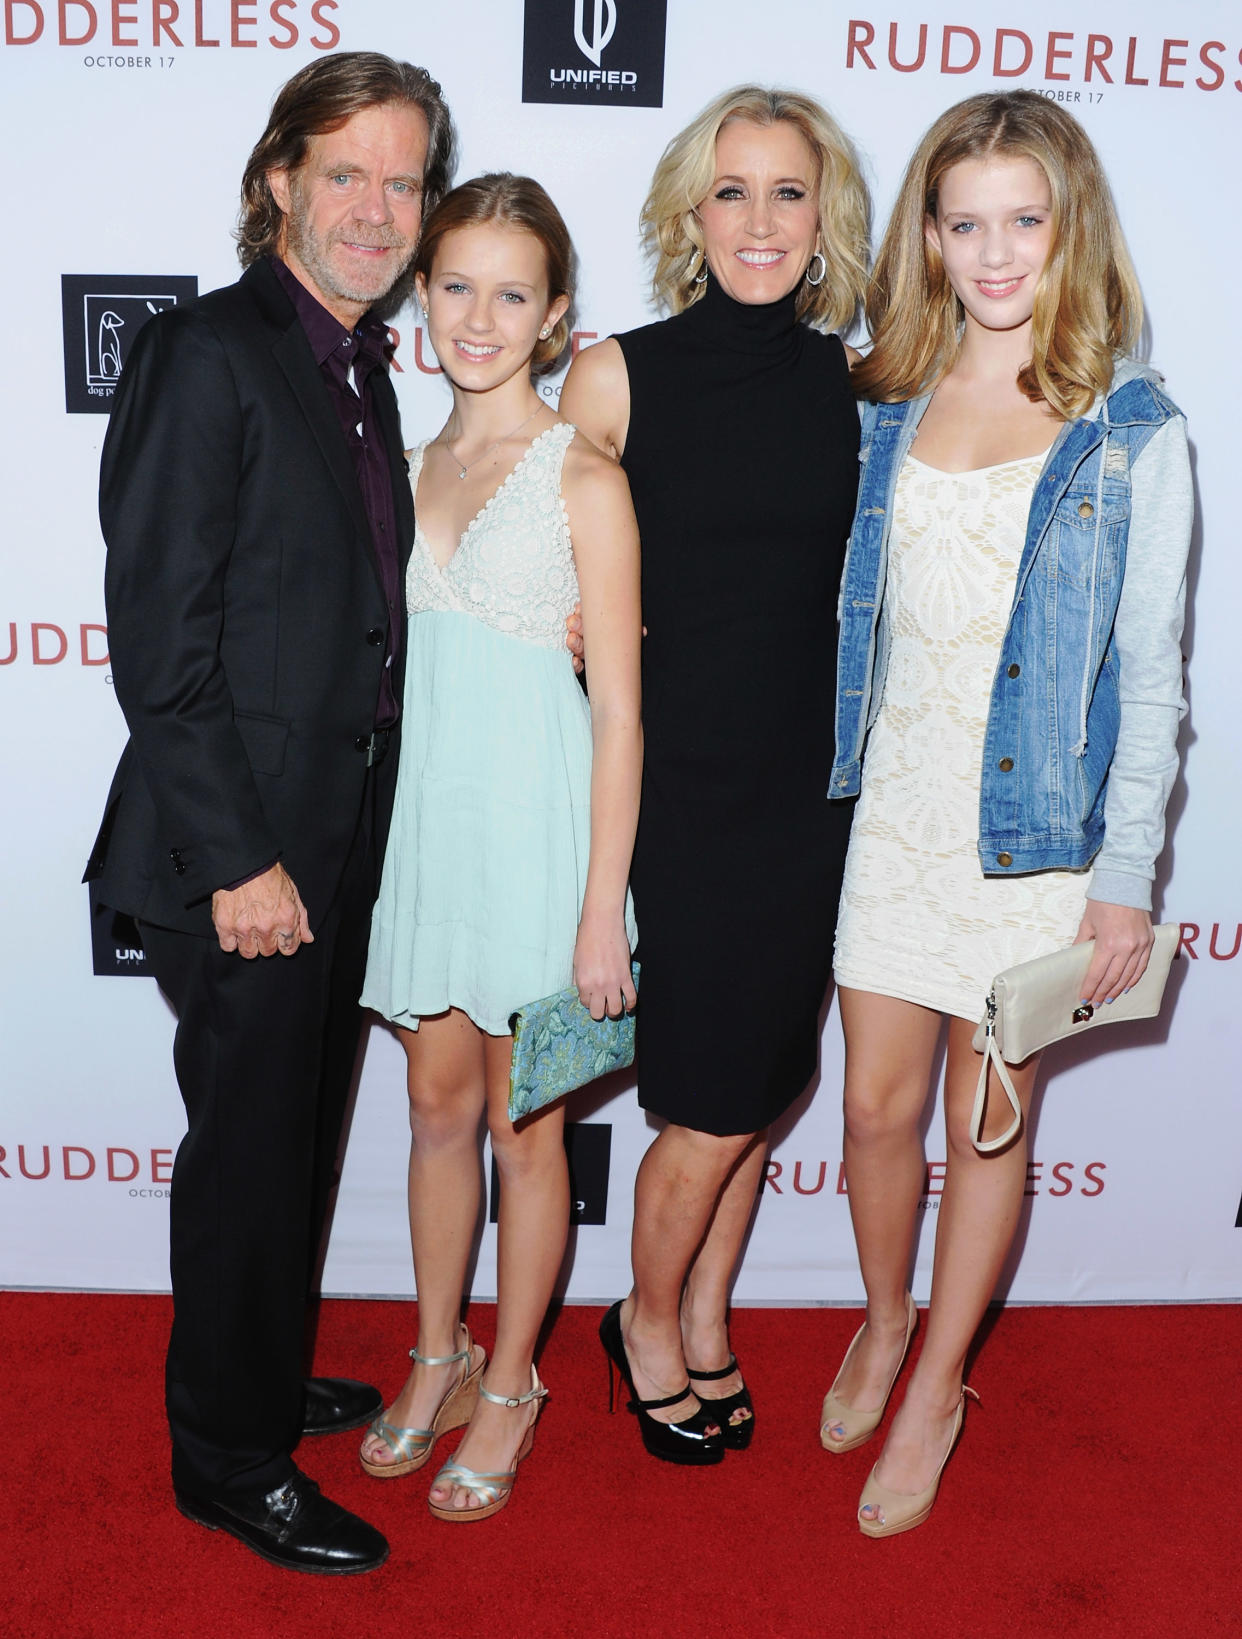 LOS ANGELES, CA - OCTOBER 07:  Director/actor William H. Macy, daughter Georgia Macy, Actress Felicity Huffman and daughter Sofia Macy arrive at the Los Angeles VIP Screening "Rudderless" at the Vista Theatre on October 7, 2014 in Los Angeles, California.  (Photo by Jon Kopaloff/FilmMagic)